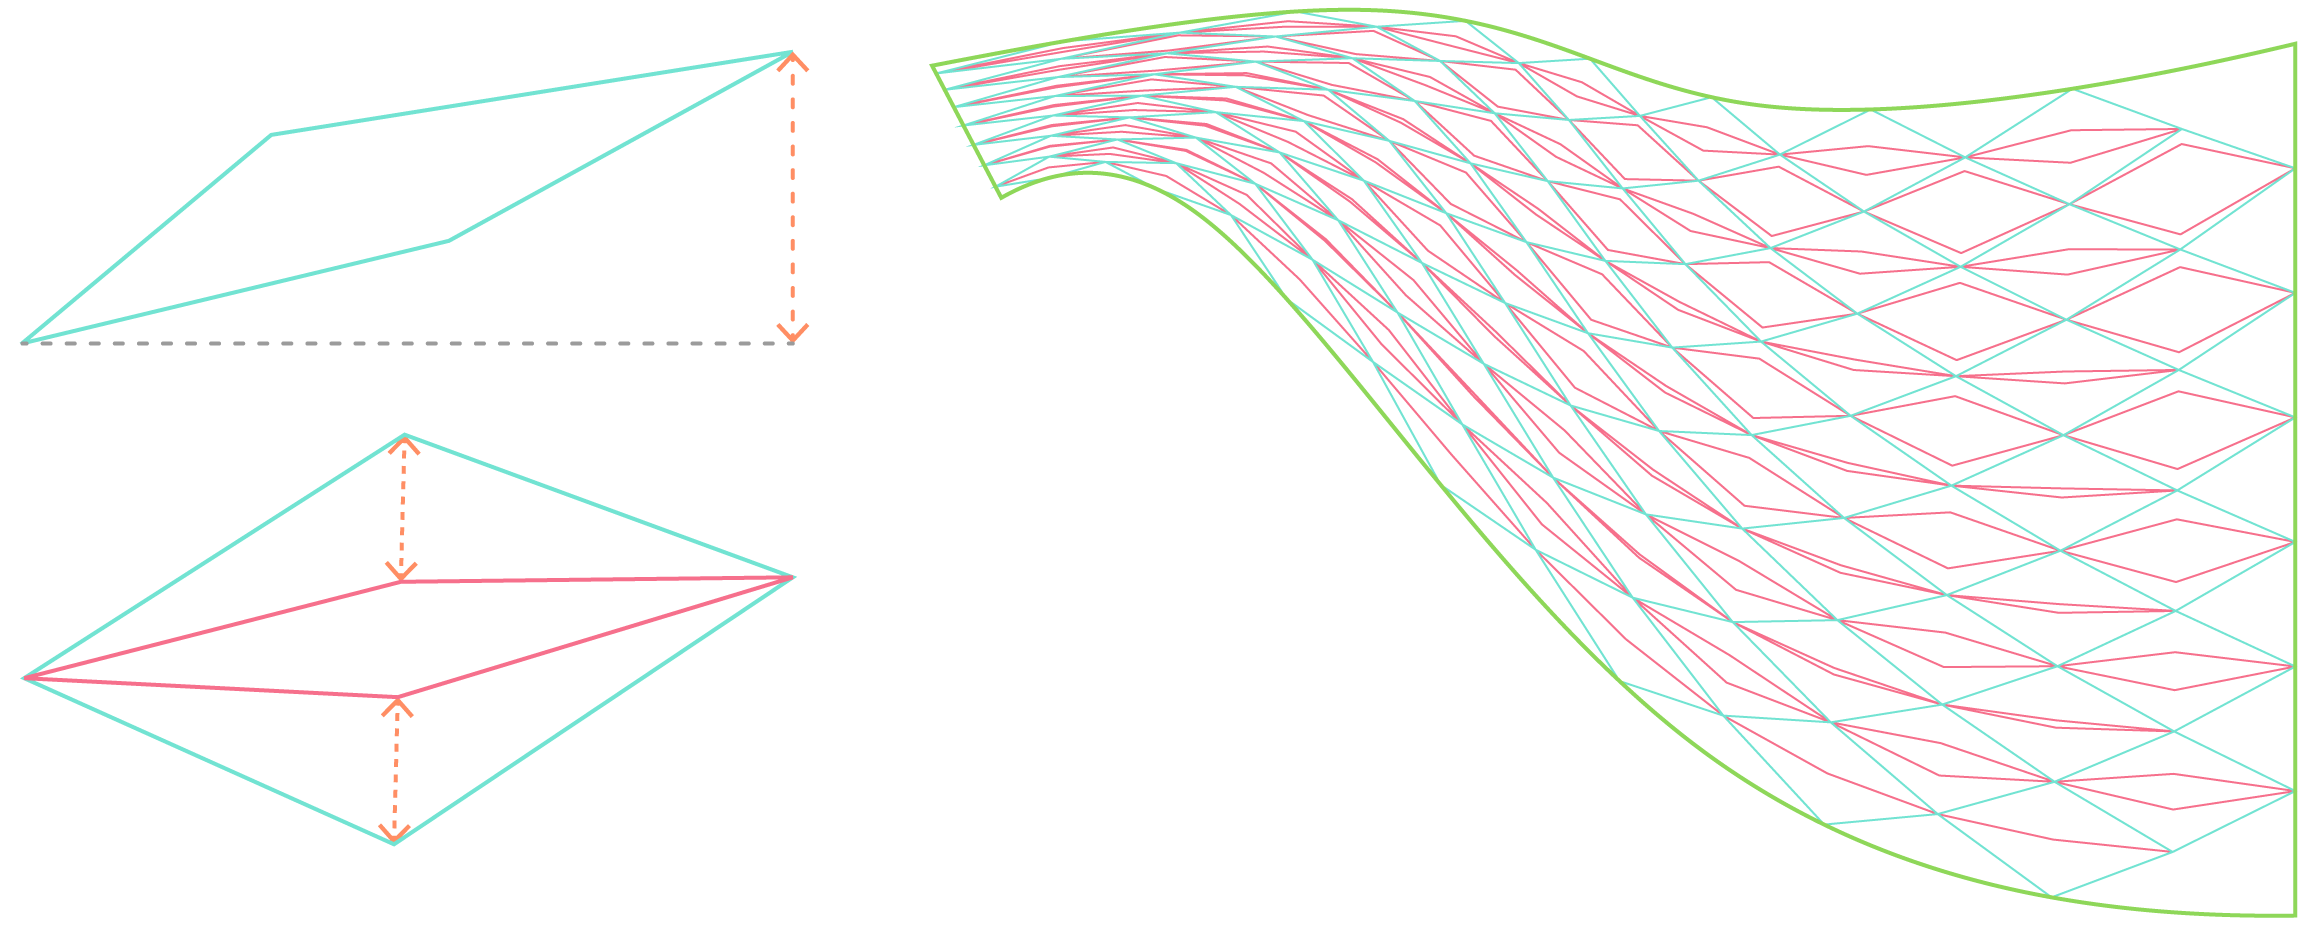 The offset of each cell's inner wall (left) is controlled by each cell's vertical range (right). While the first layer of patterning conforms to the topography of a 3D surface, the second responds in size to a specific environmental input (in this case, slope).